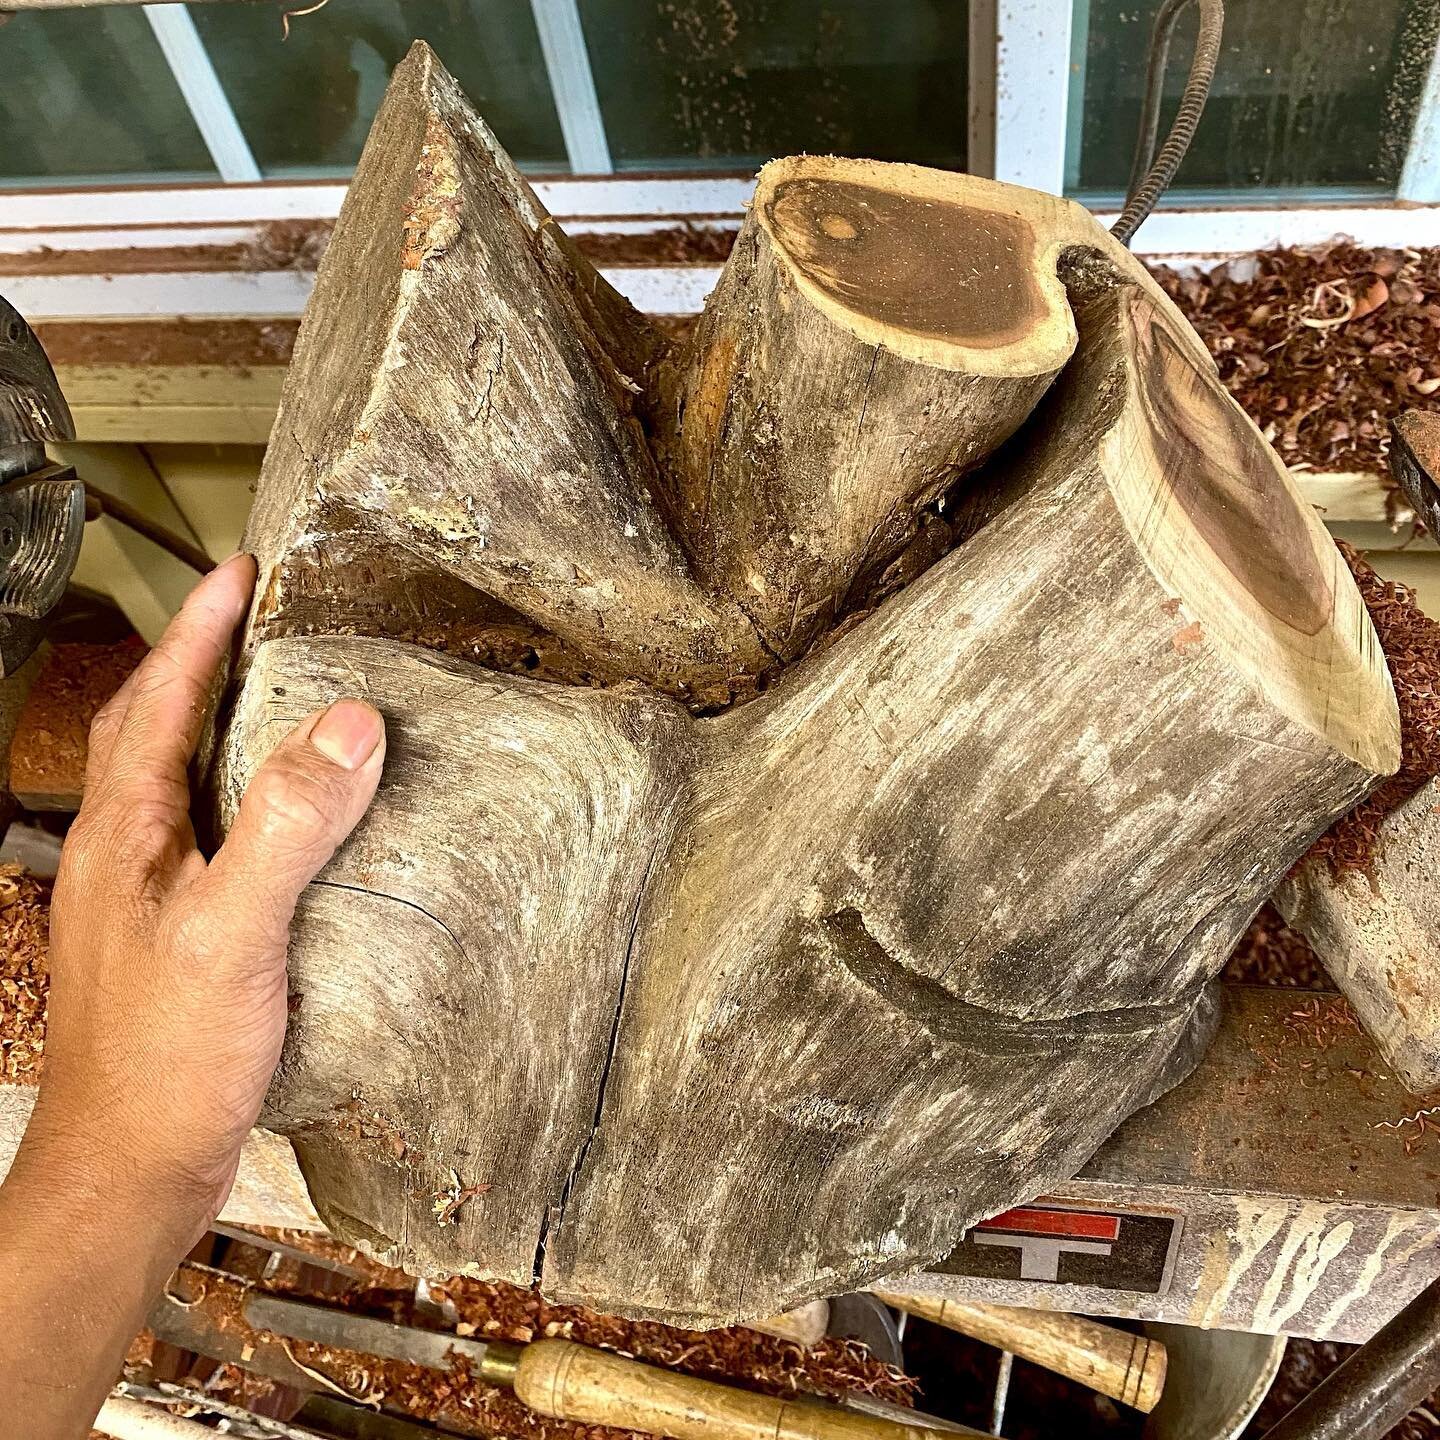 My next project, Milo root. I have no idea what the end product will look like. Looks scary, but I guess we&rsquo;ll find out together? Wish me luck! 🍀🤞
-
-
-
-
-
#wood #woods #wooden #woodworking #woodturning #woodporn #woodwork #handcrafted #wood